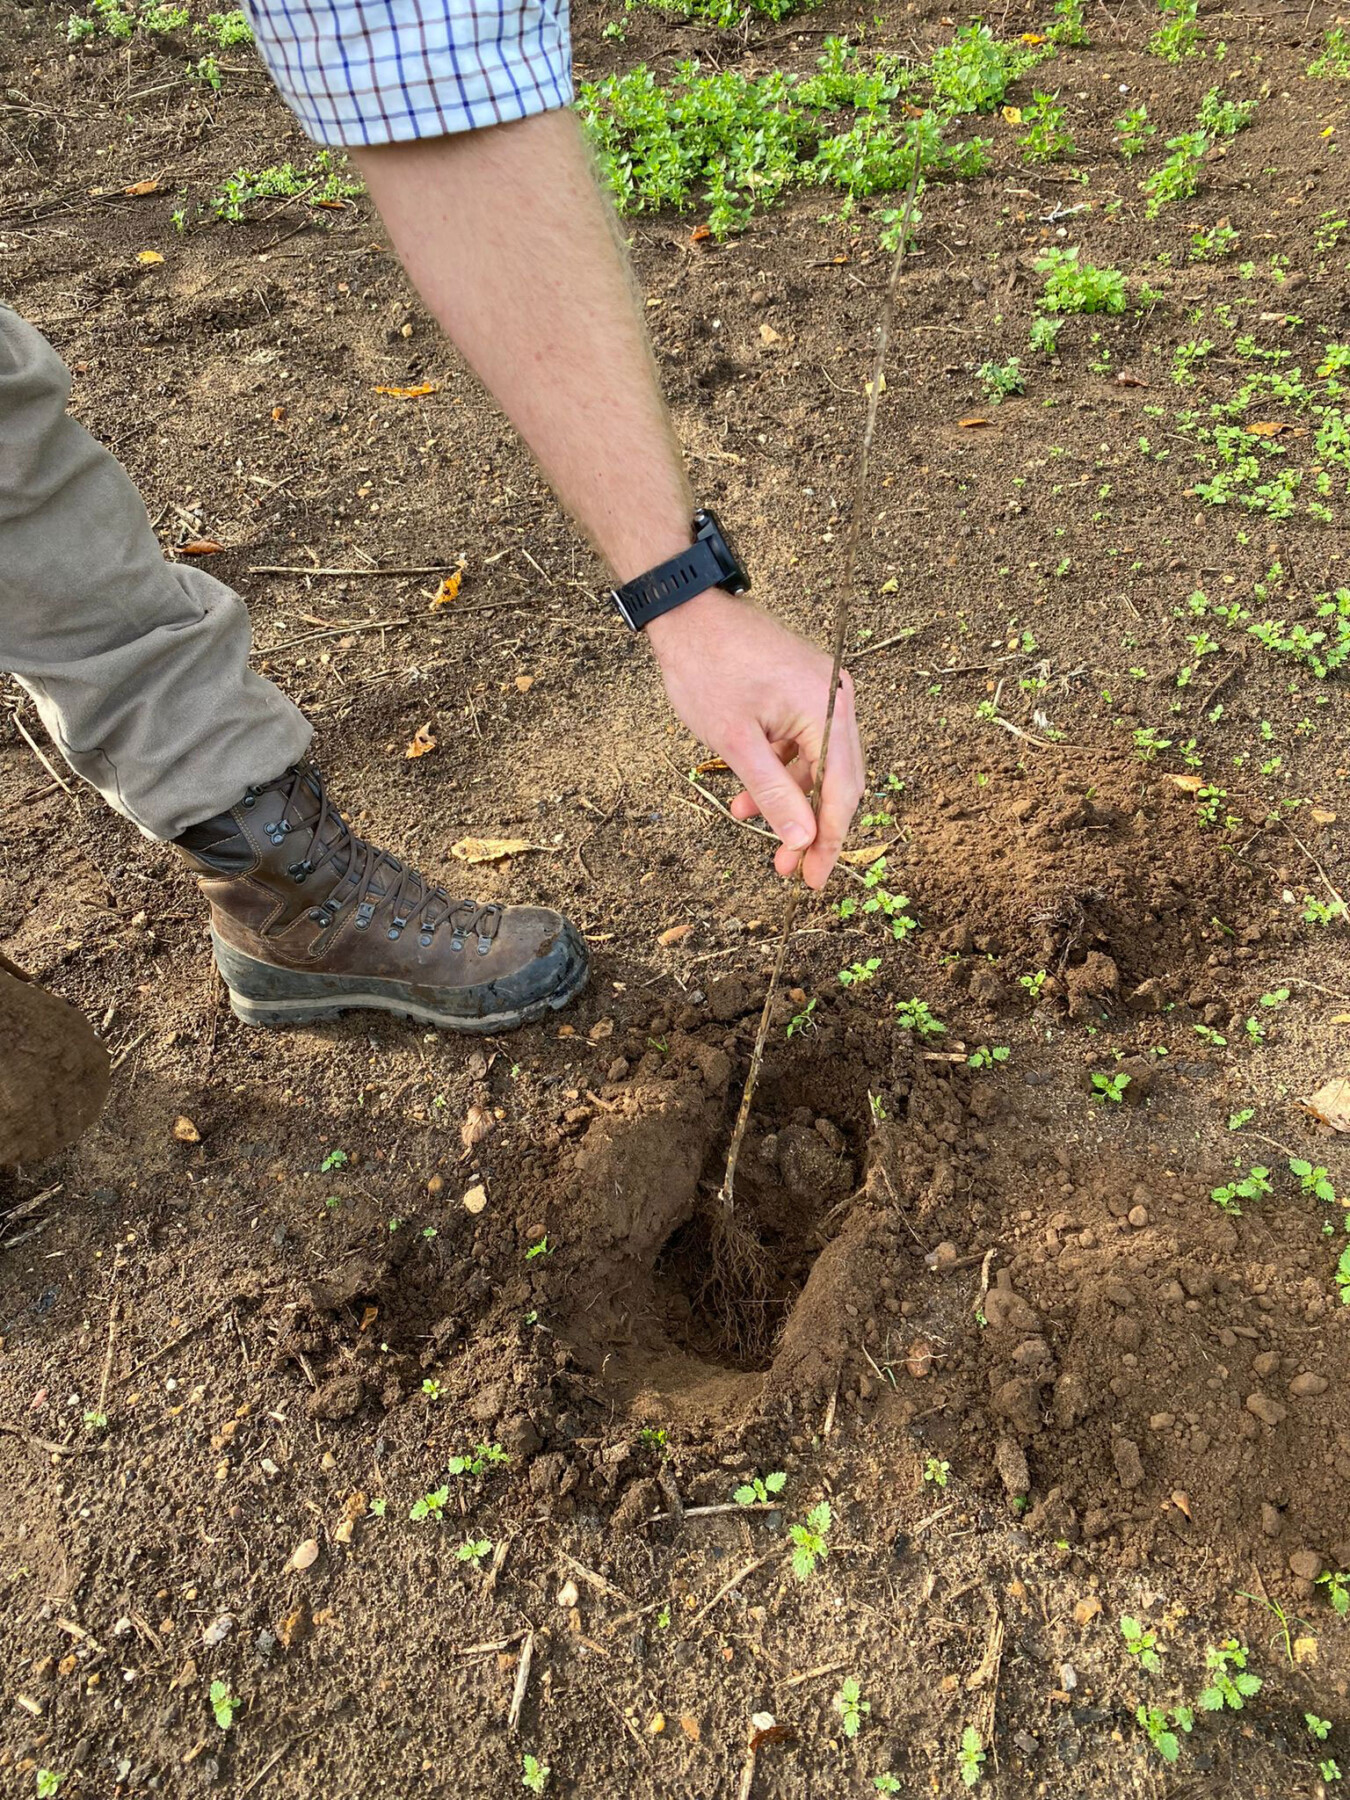 Planting Bare Root Trees